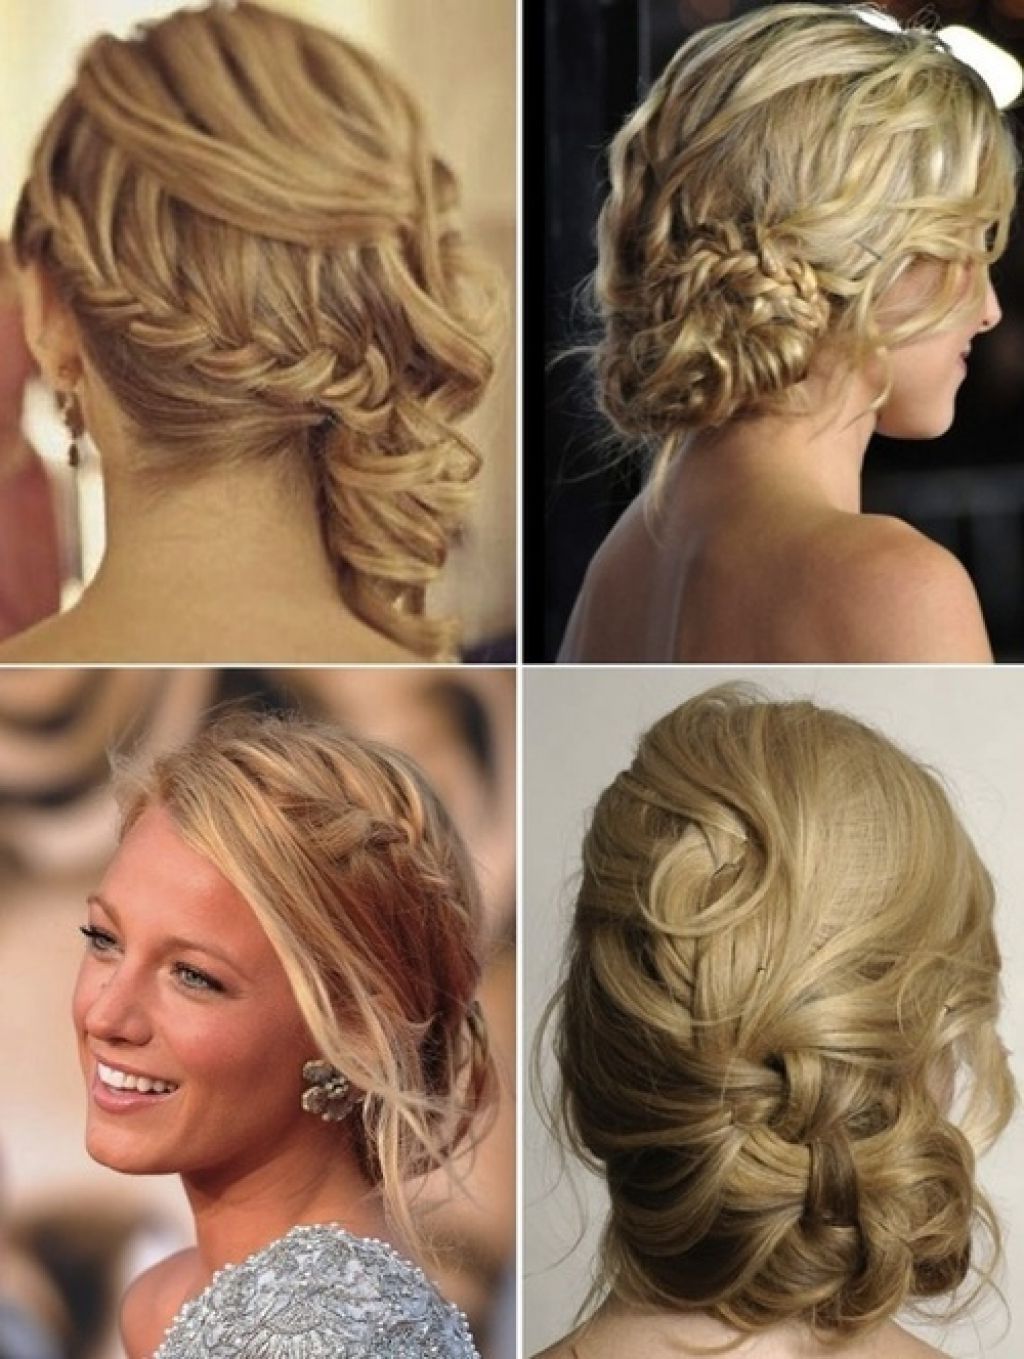 Casual Wedding Hairstyles For Long Hair – Hairstyle For Women & Man With Popular Casual Wedding Hairstyles For Long Hair (View 1 of 15)